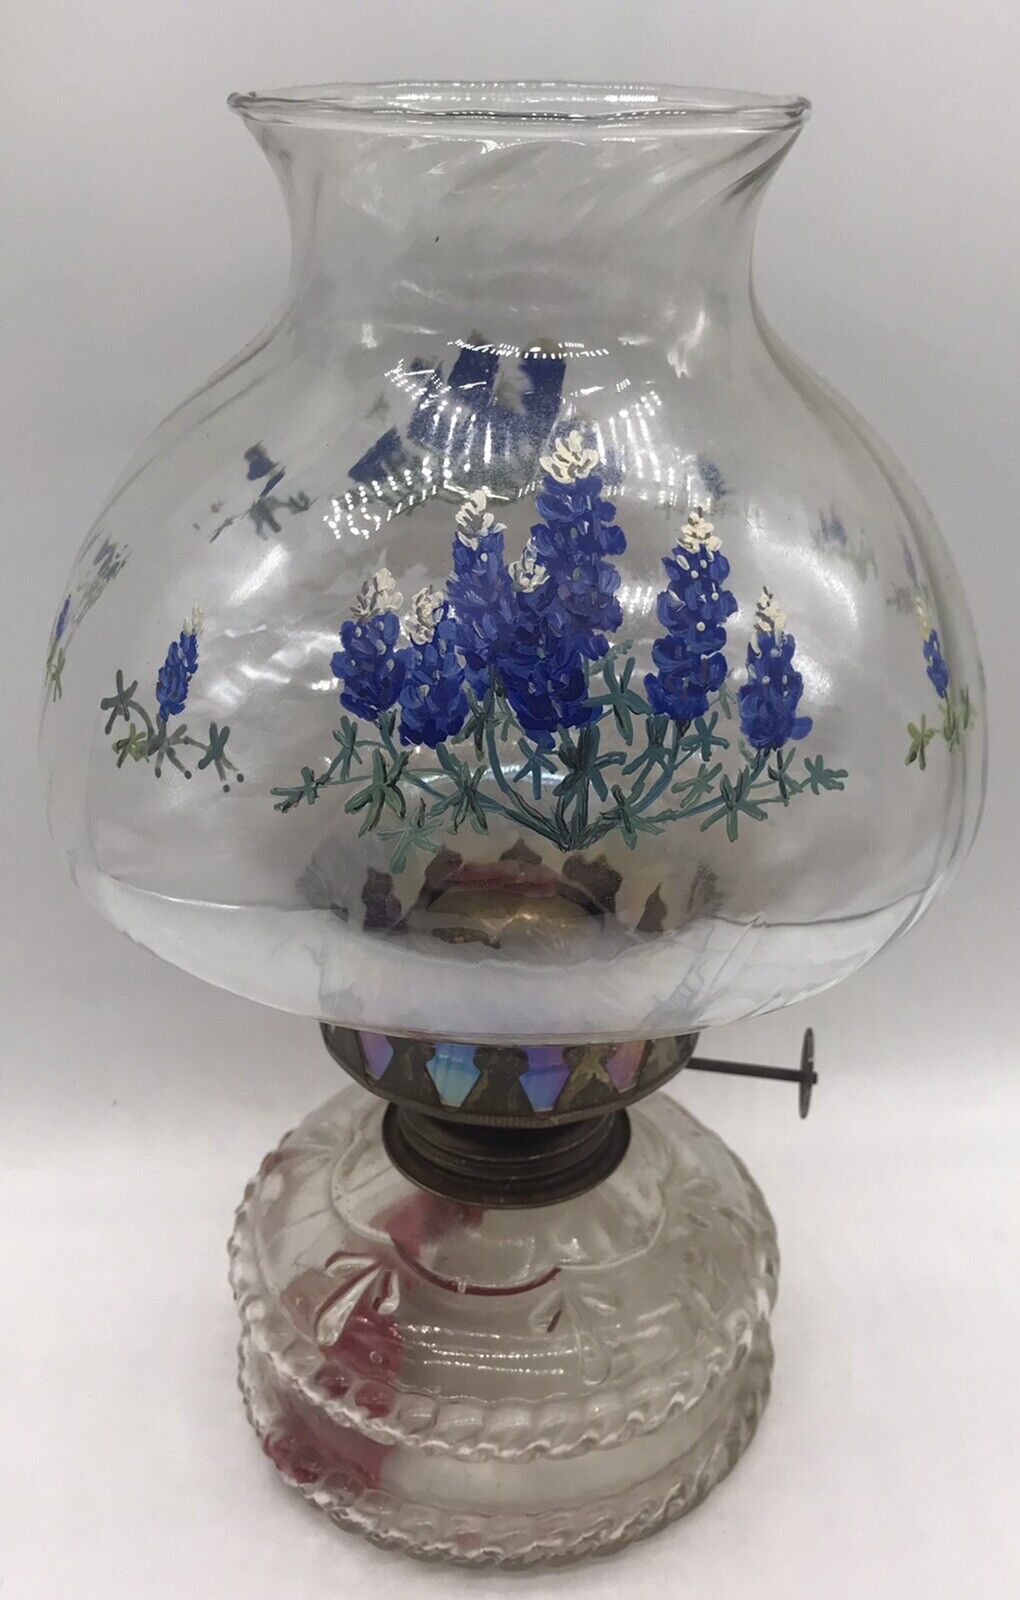 BEAUTIFUL VINTAGE OIL LAMP HONG KONG-HAND PAINTED FLORAL THEME